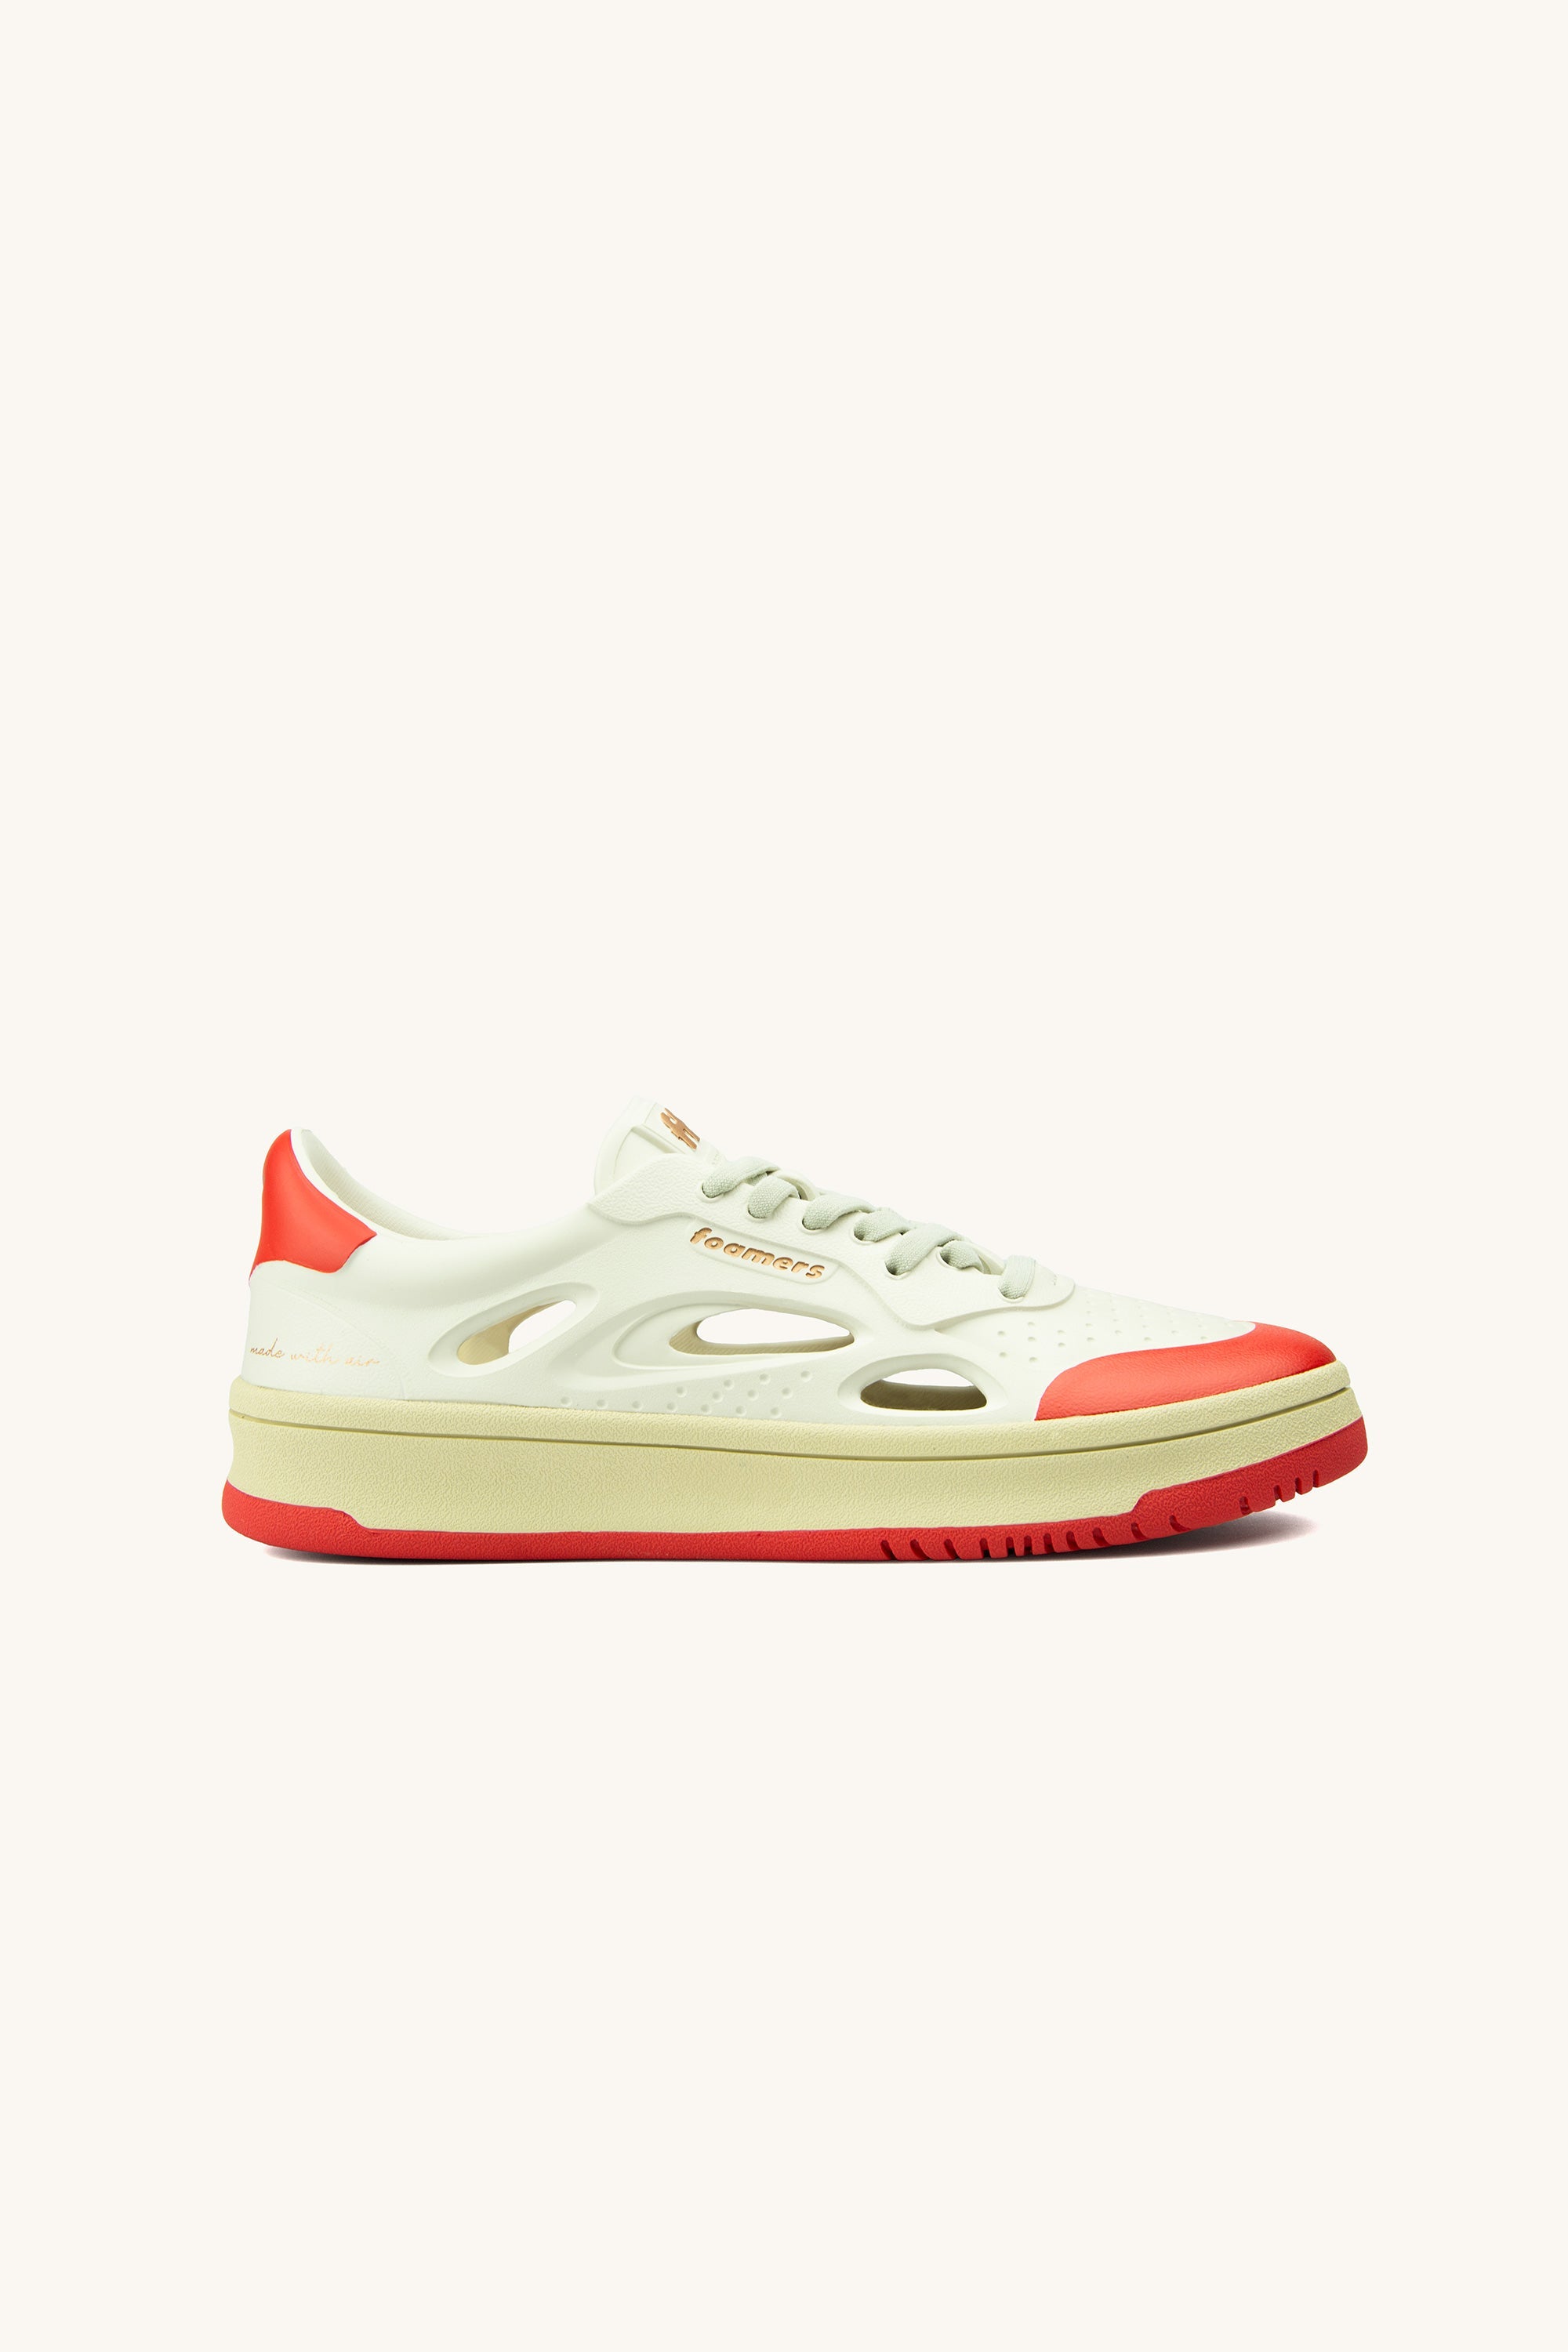 ♀ Fluffers WHITE/BEIGE/RED/RED - R00012